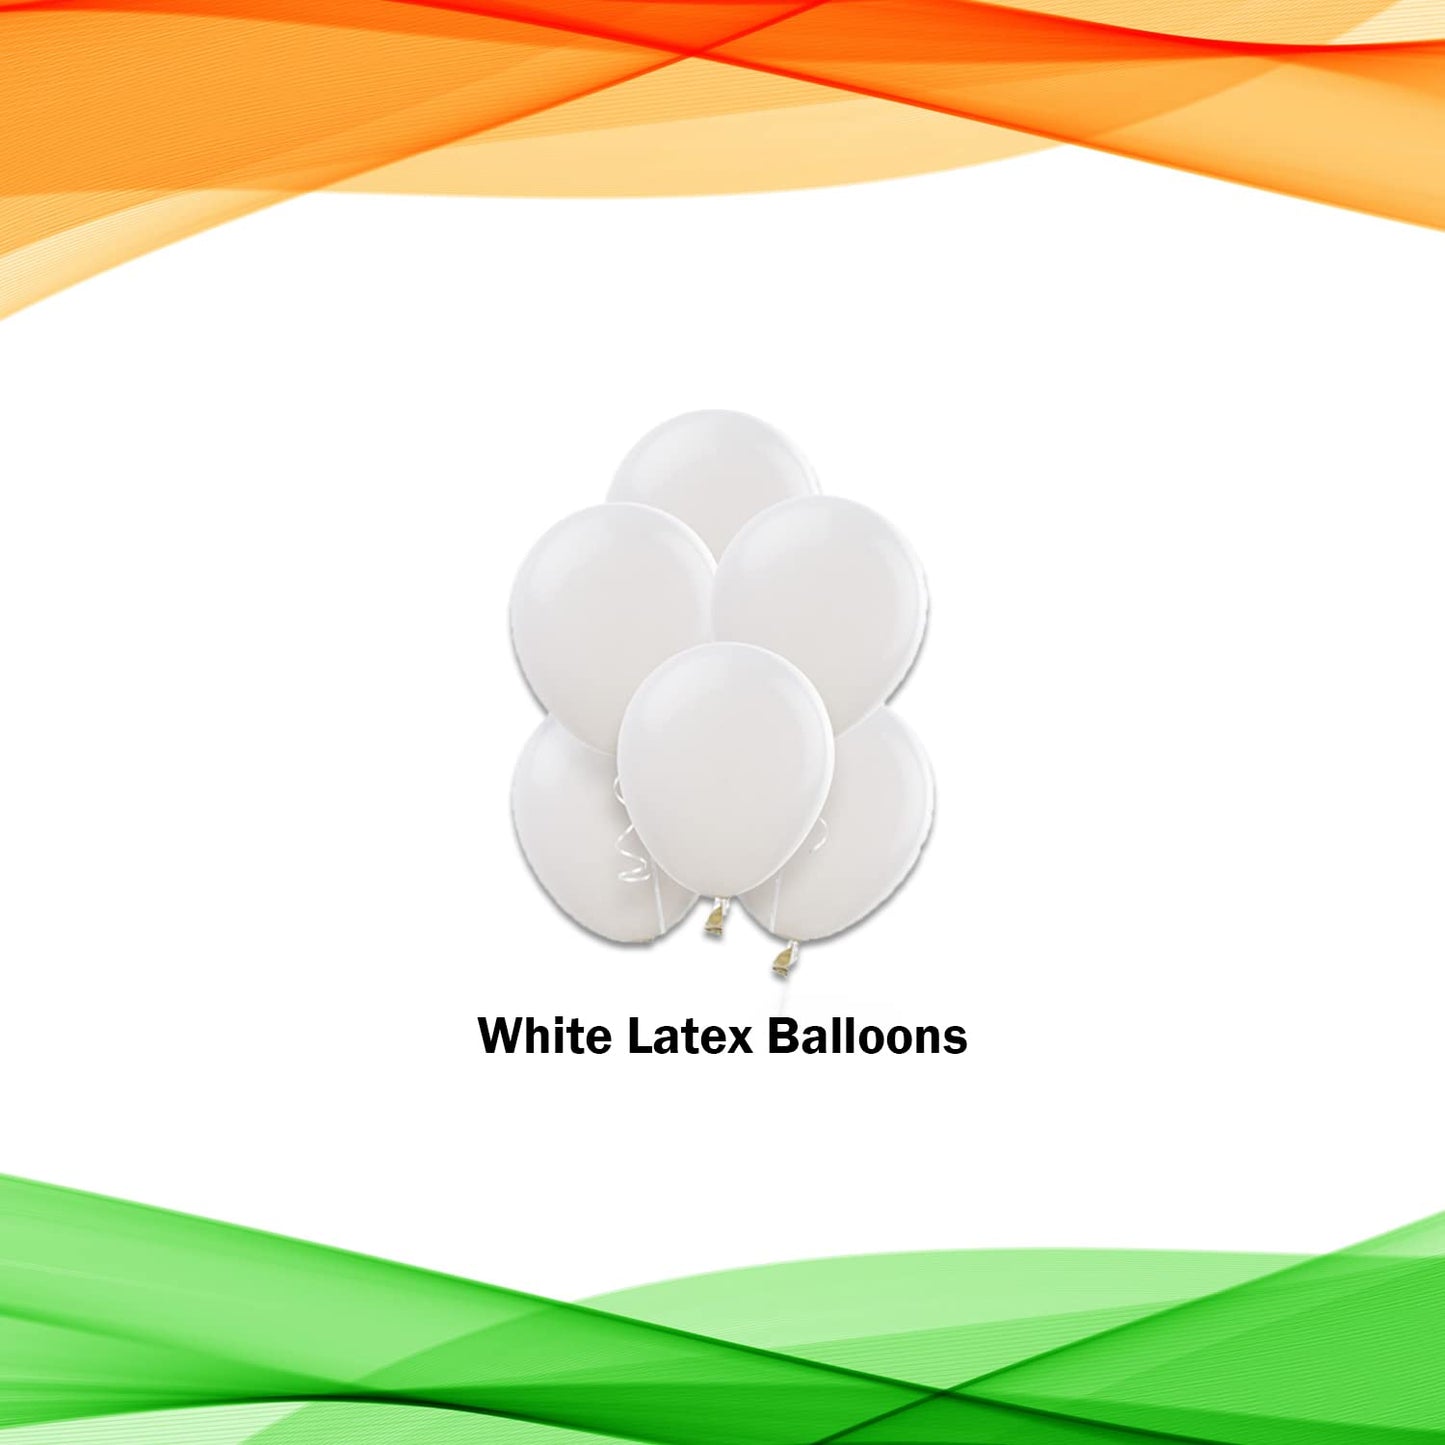 26 January Decoration Items - Pack of 41 Pcs - Letter Foil & Latex balloons - Tricolour Balloons - CherishX Partystore